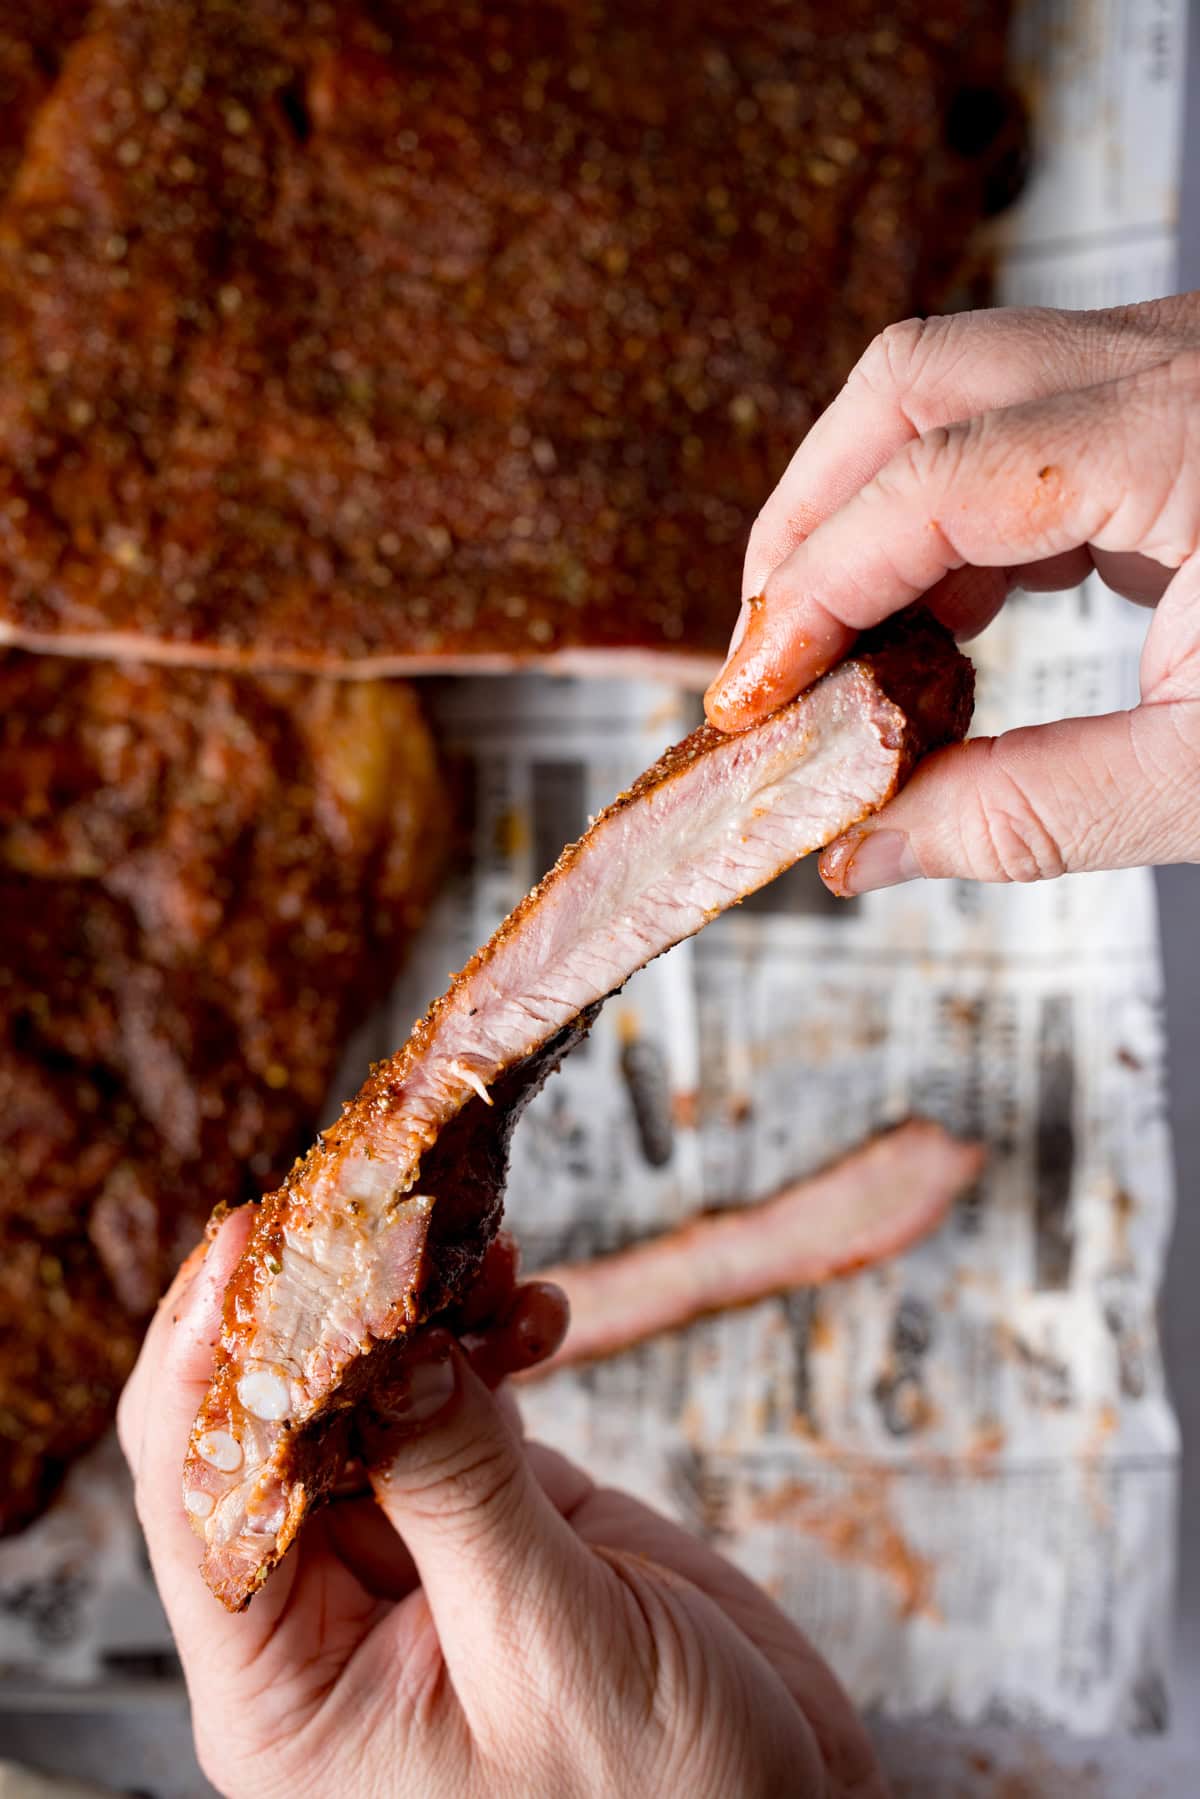 A tall, close-up image of dry rub BBQ ribs, there are two racks of the ribs laid out on a silver tray that is lined with newspaper. The central rack of ribs is cut into and the two of the ribs are separated so you can see the ribs. In the foreground there are two hands picking up one rib, showing the inside of the rib to the camera. This is all set on a light grey background.